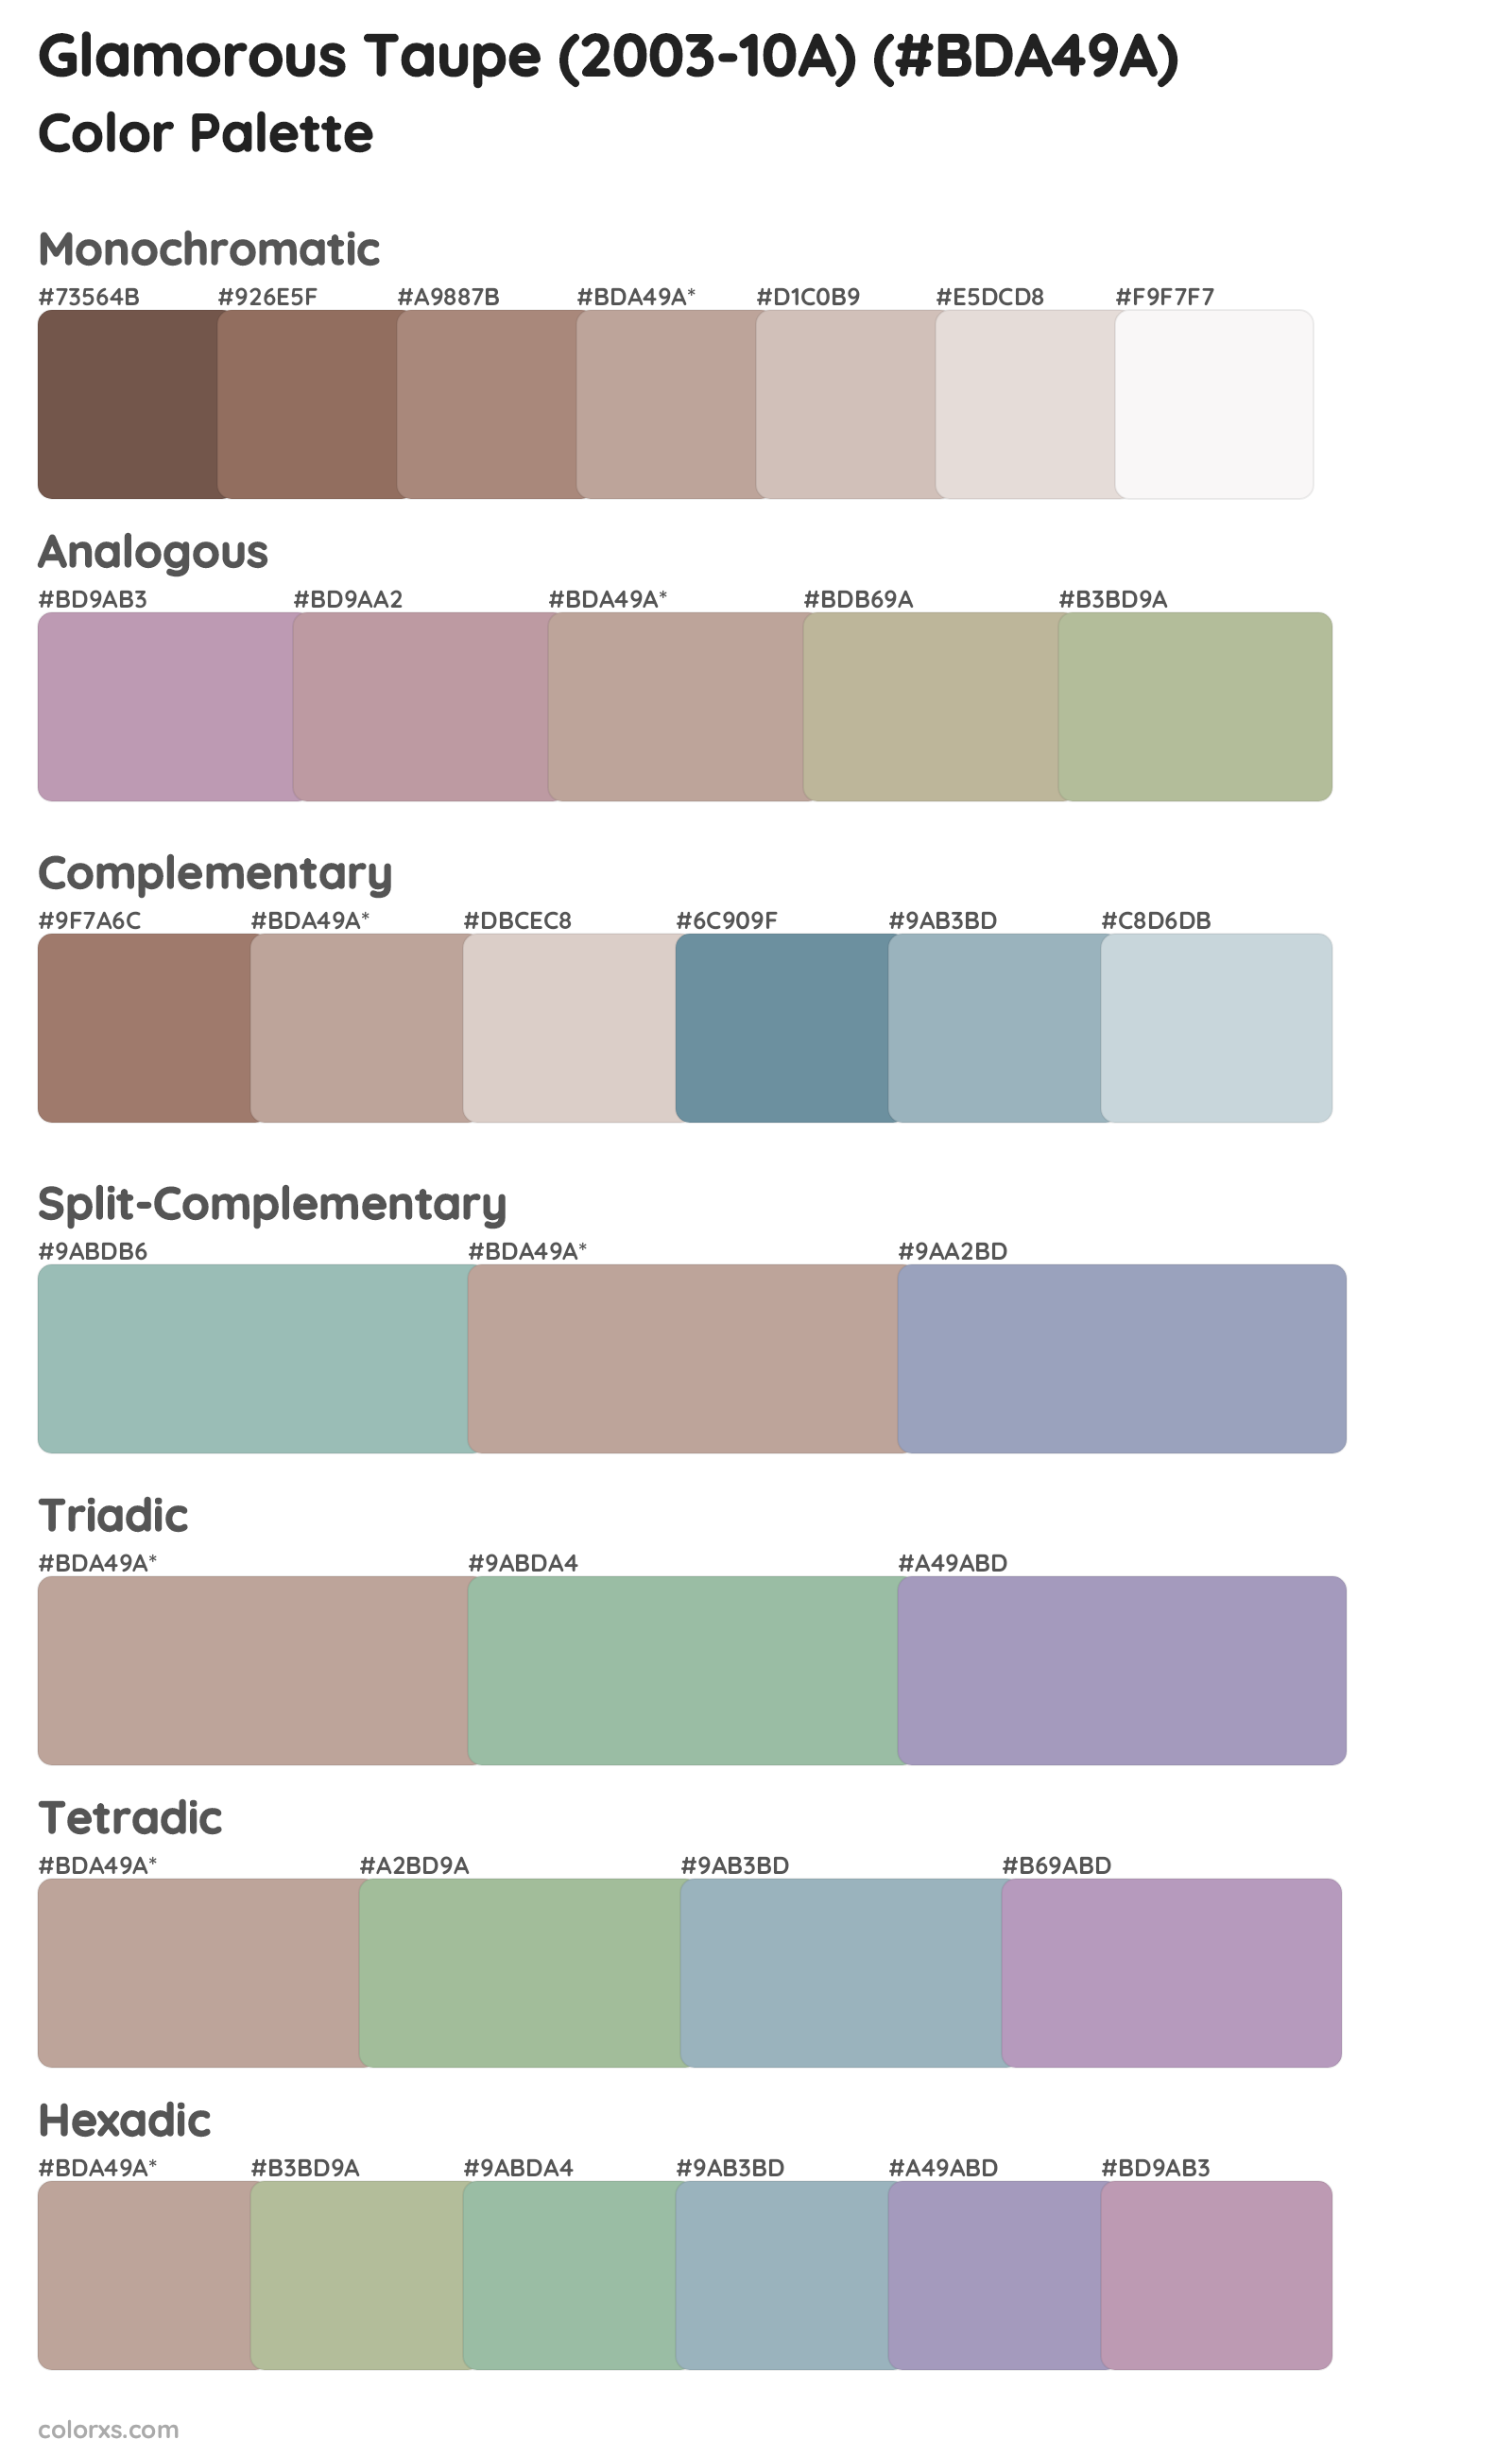 Glamorous Taupe (2003-10A) Color Scheme Palettes